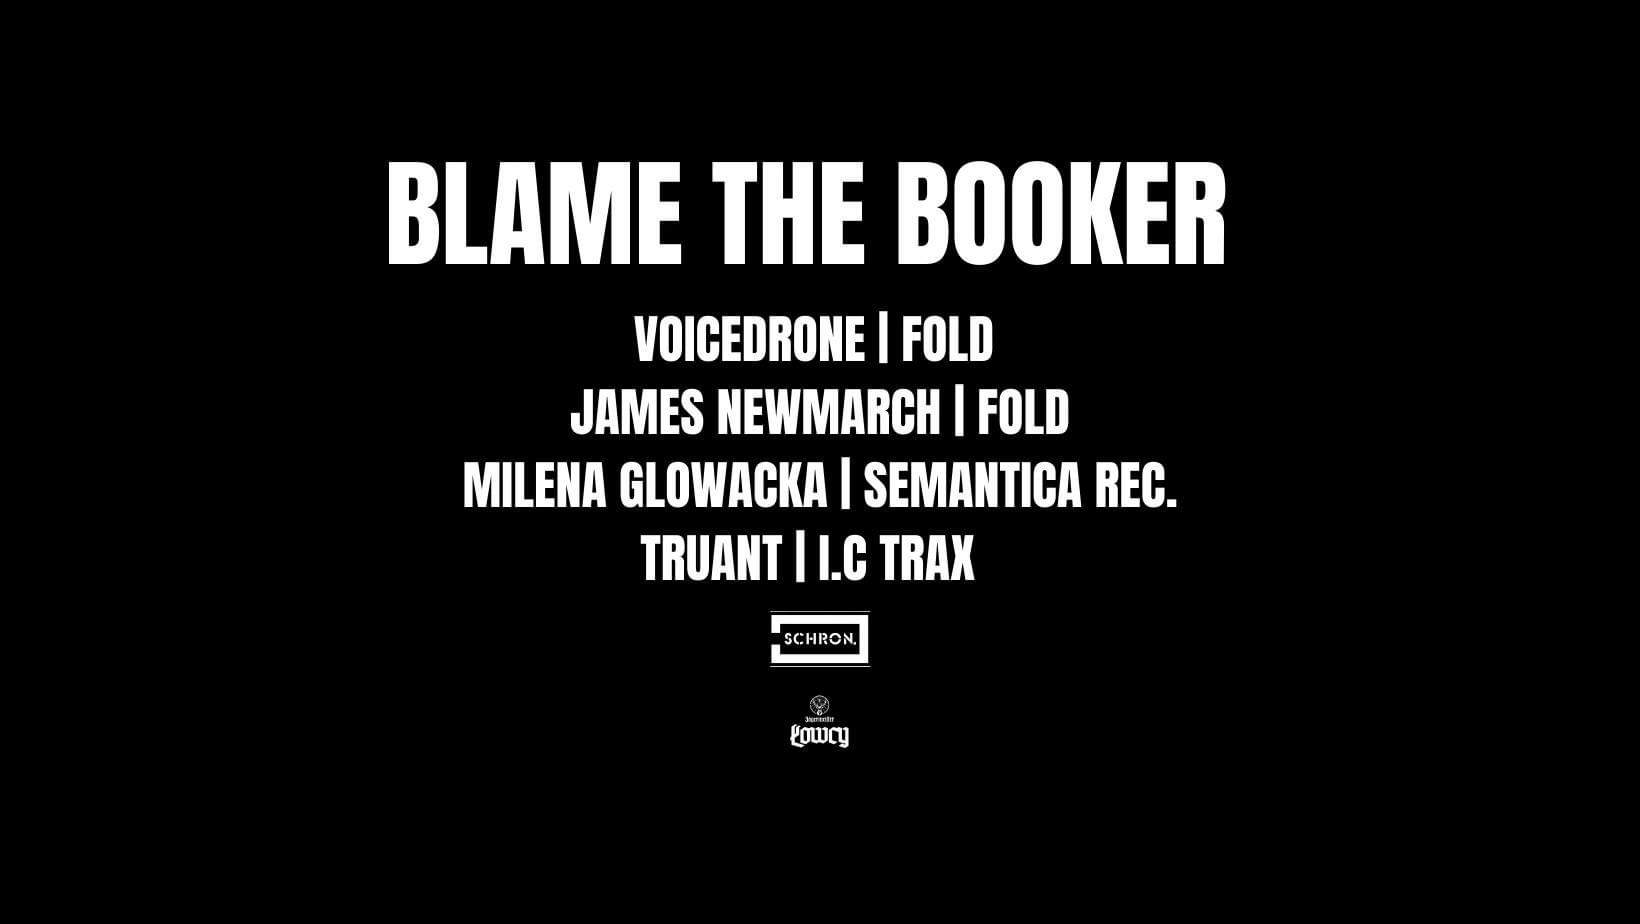 BLAME THE BOOKER - Página frontal